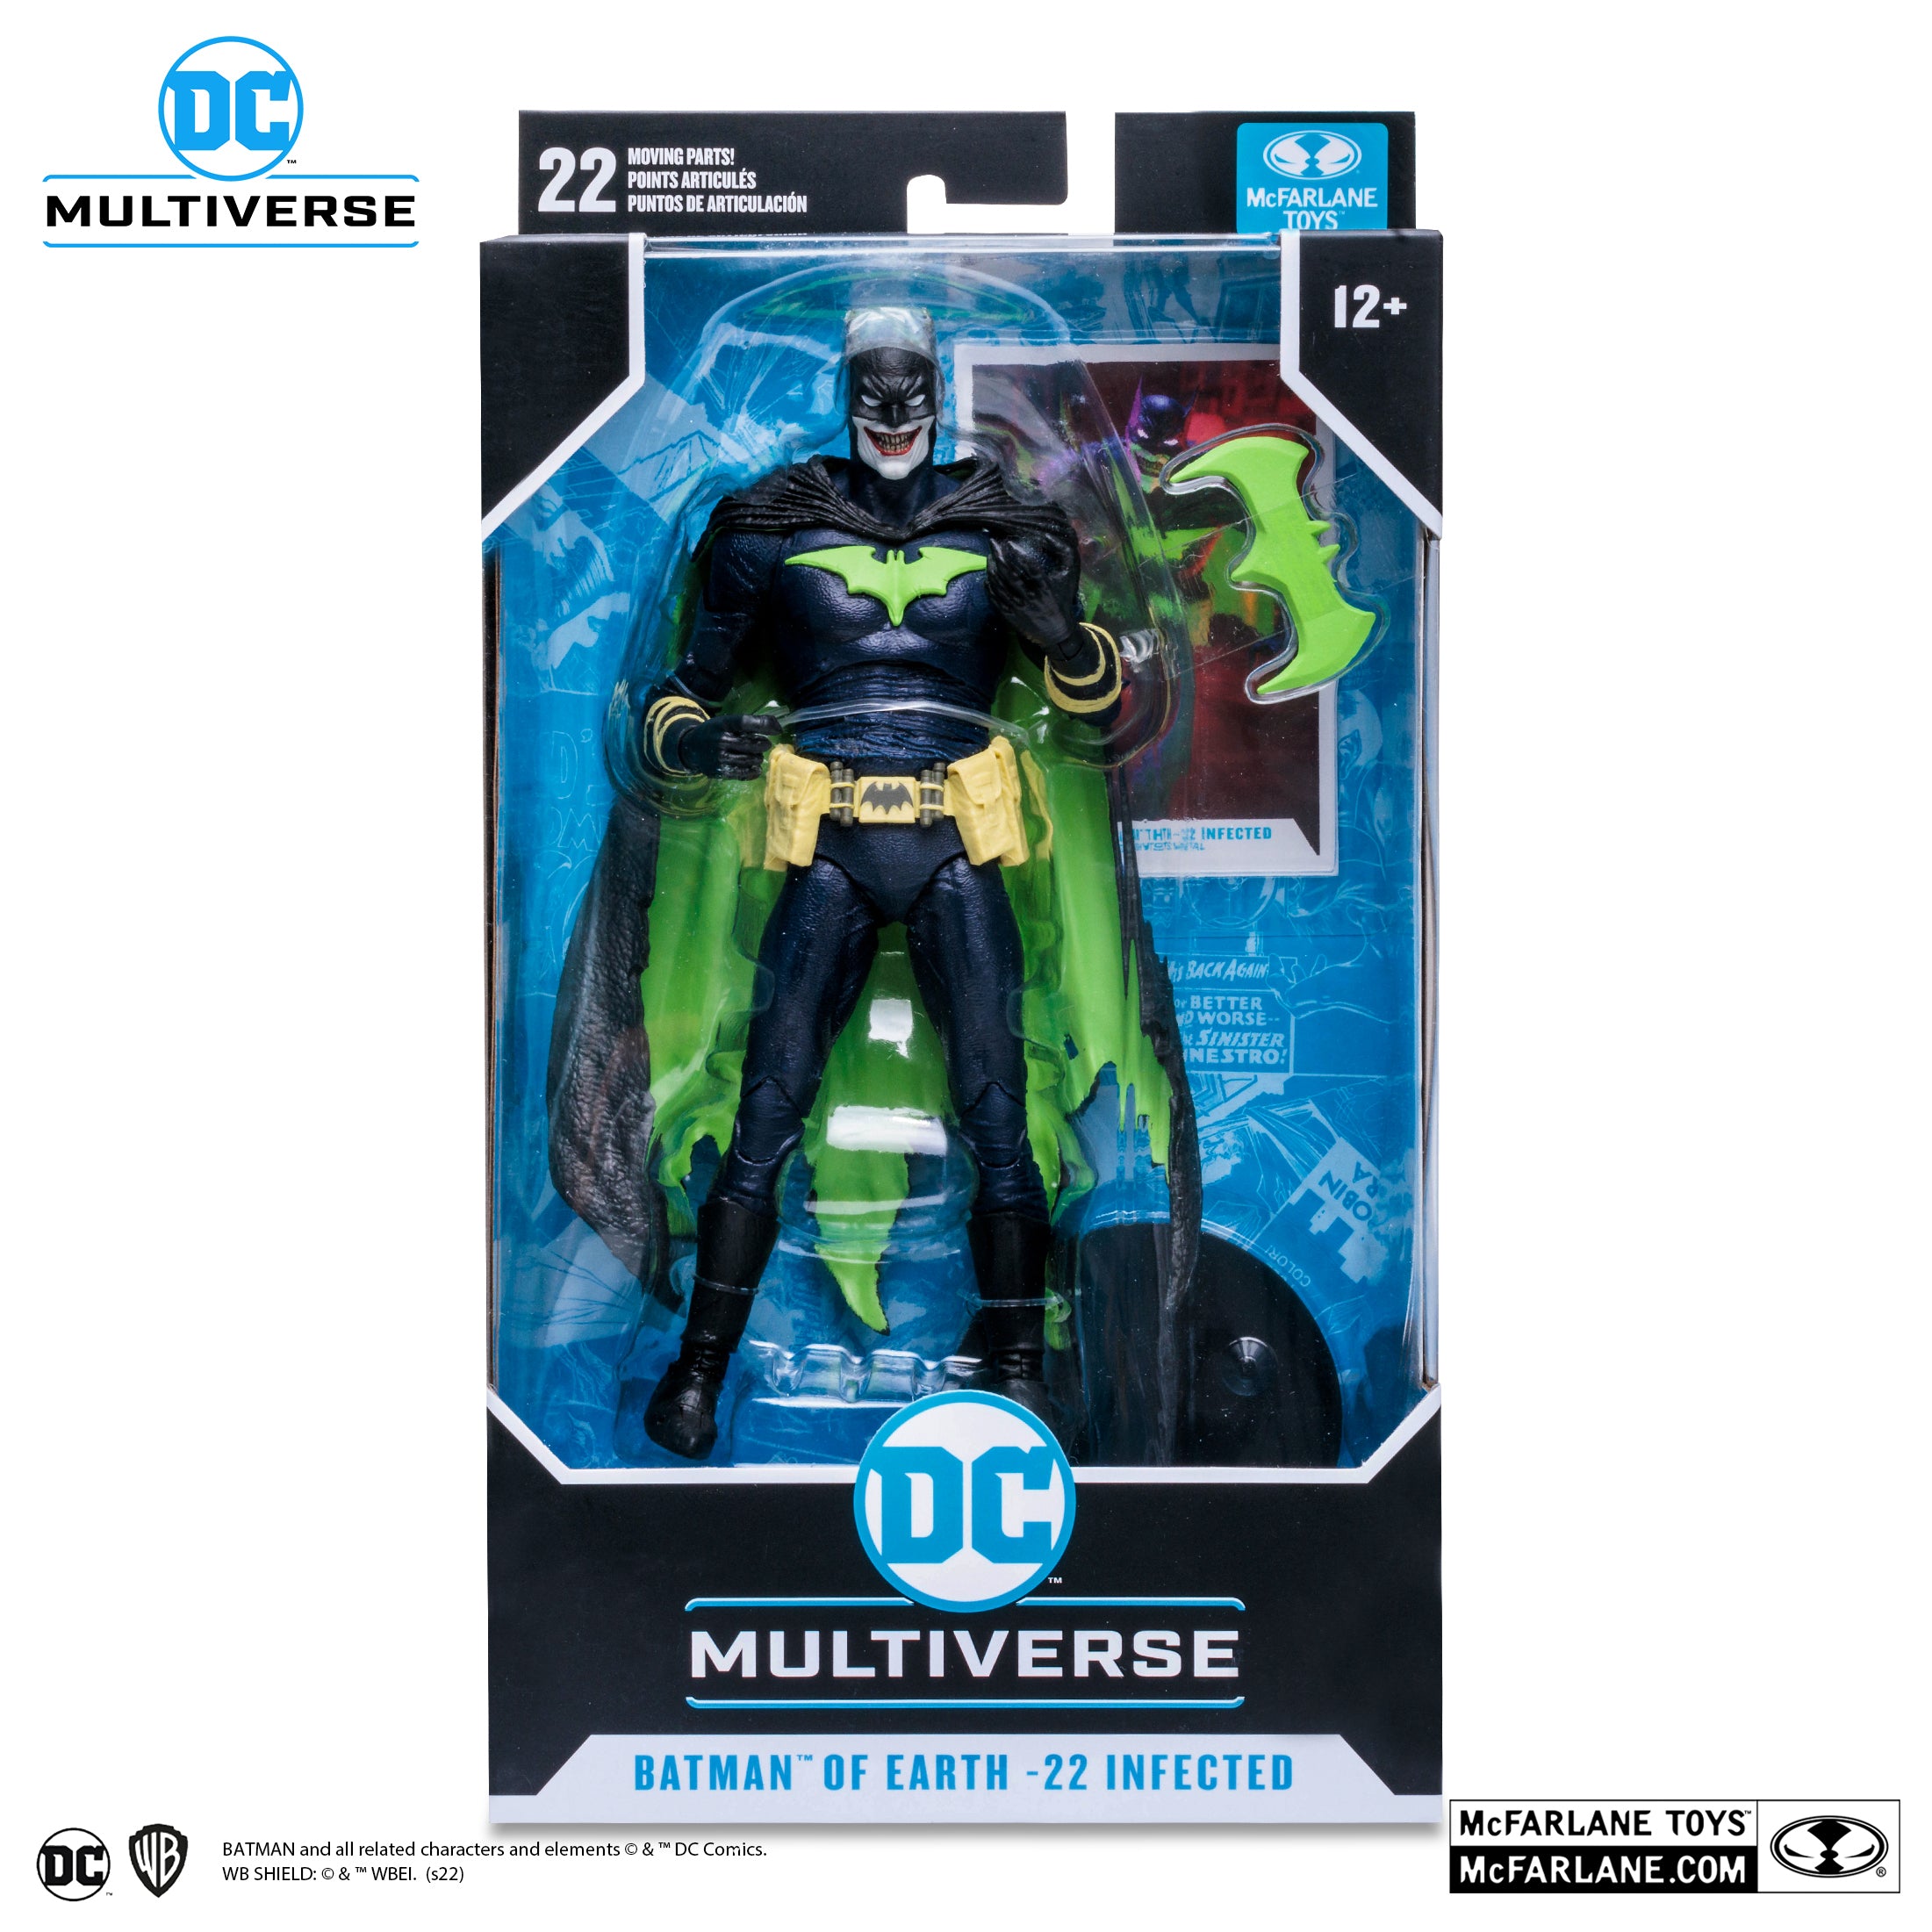 BATMAN OF EARTH-22 INFECTED By McFarlane